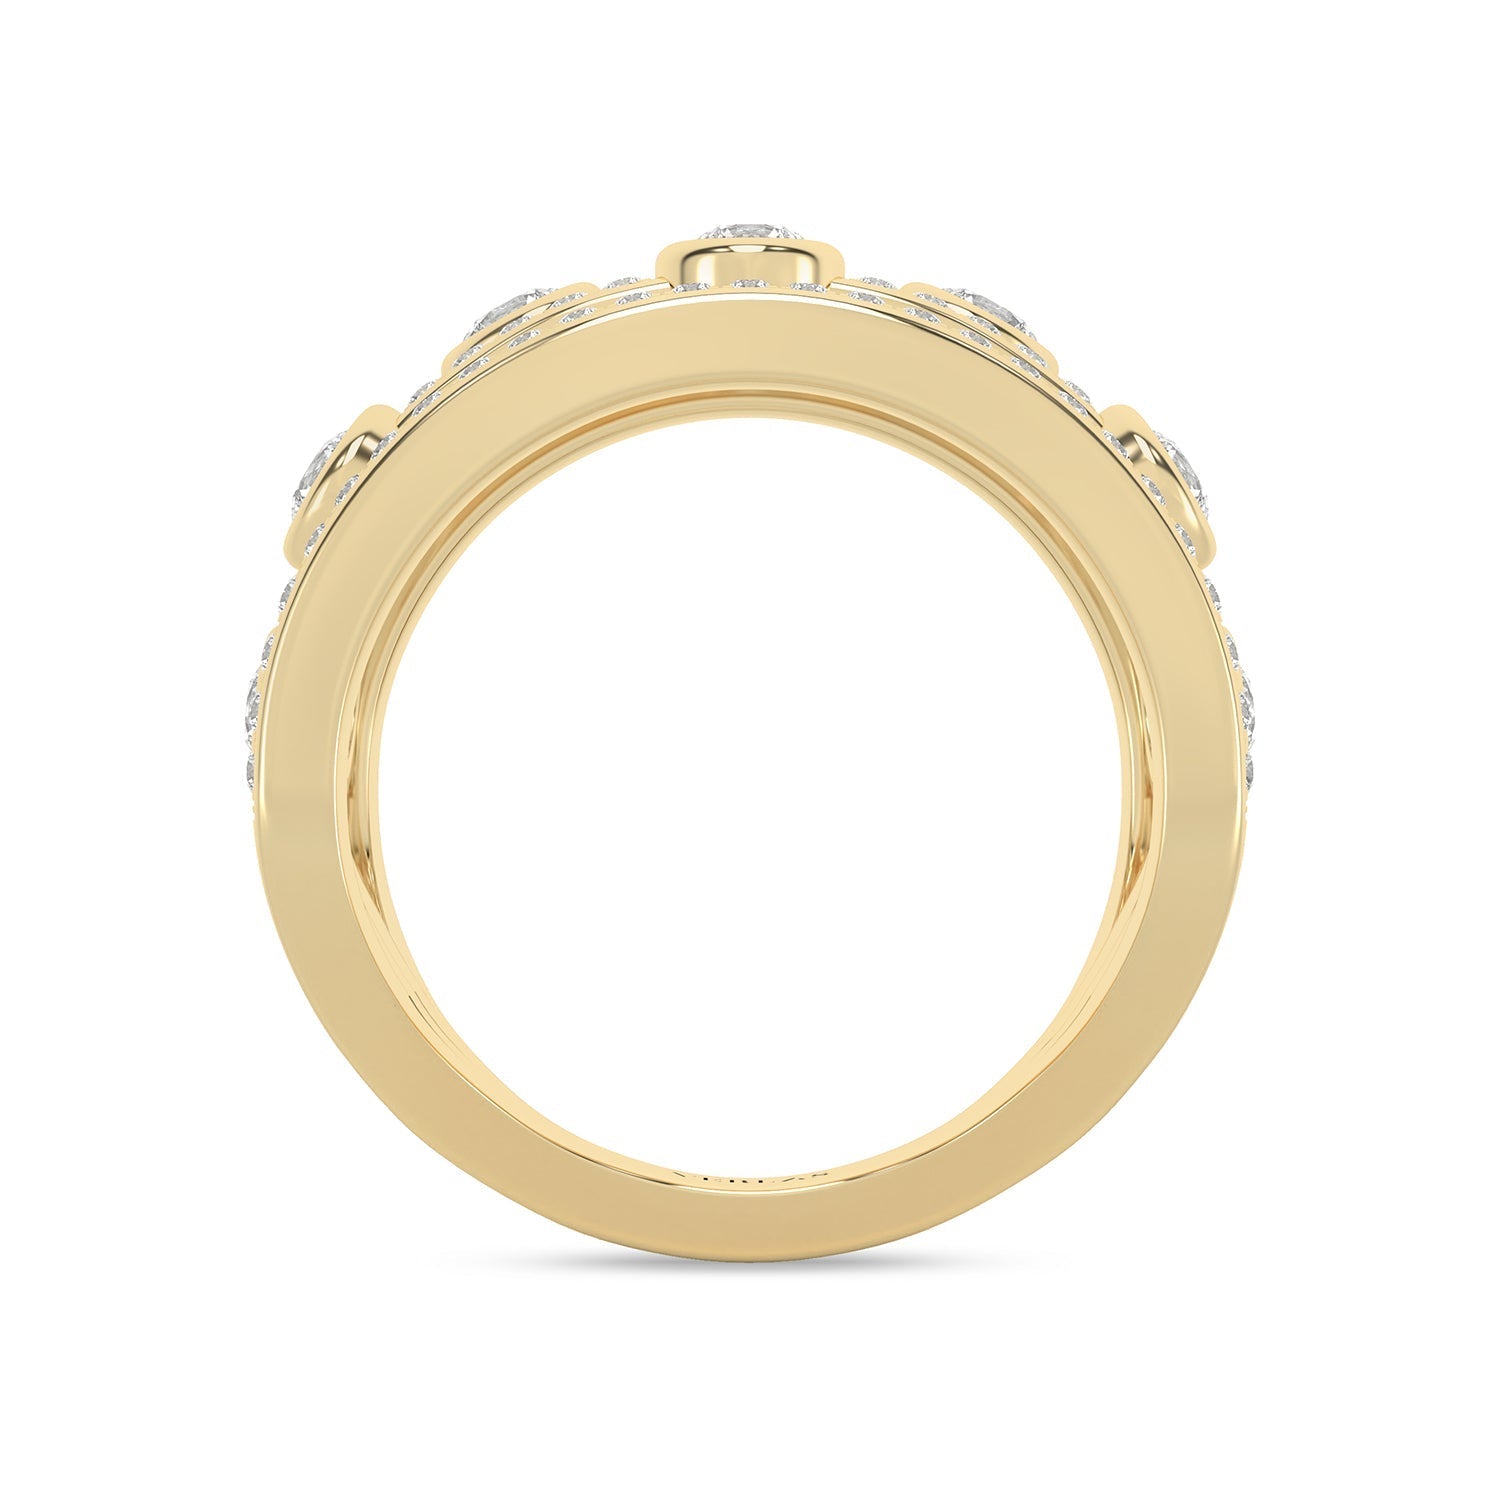 2x2 Tier Smitten Ring_Product Angle_1 Ct. - 3